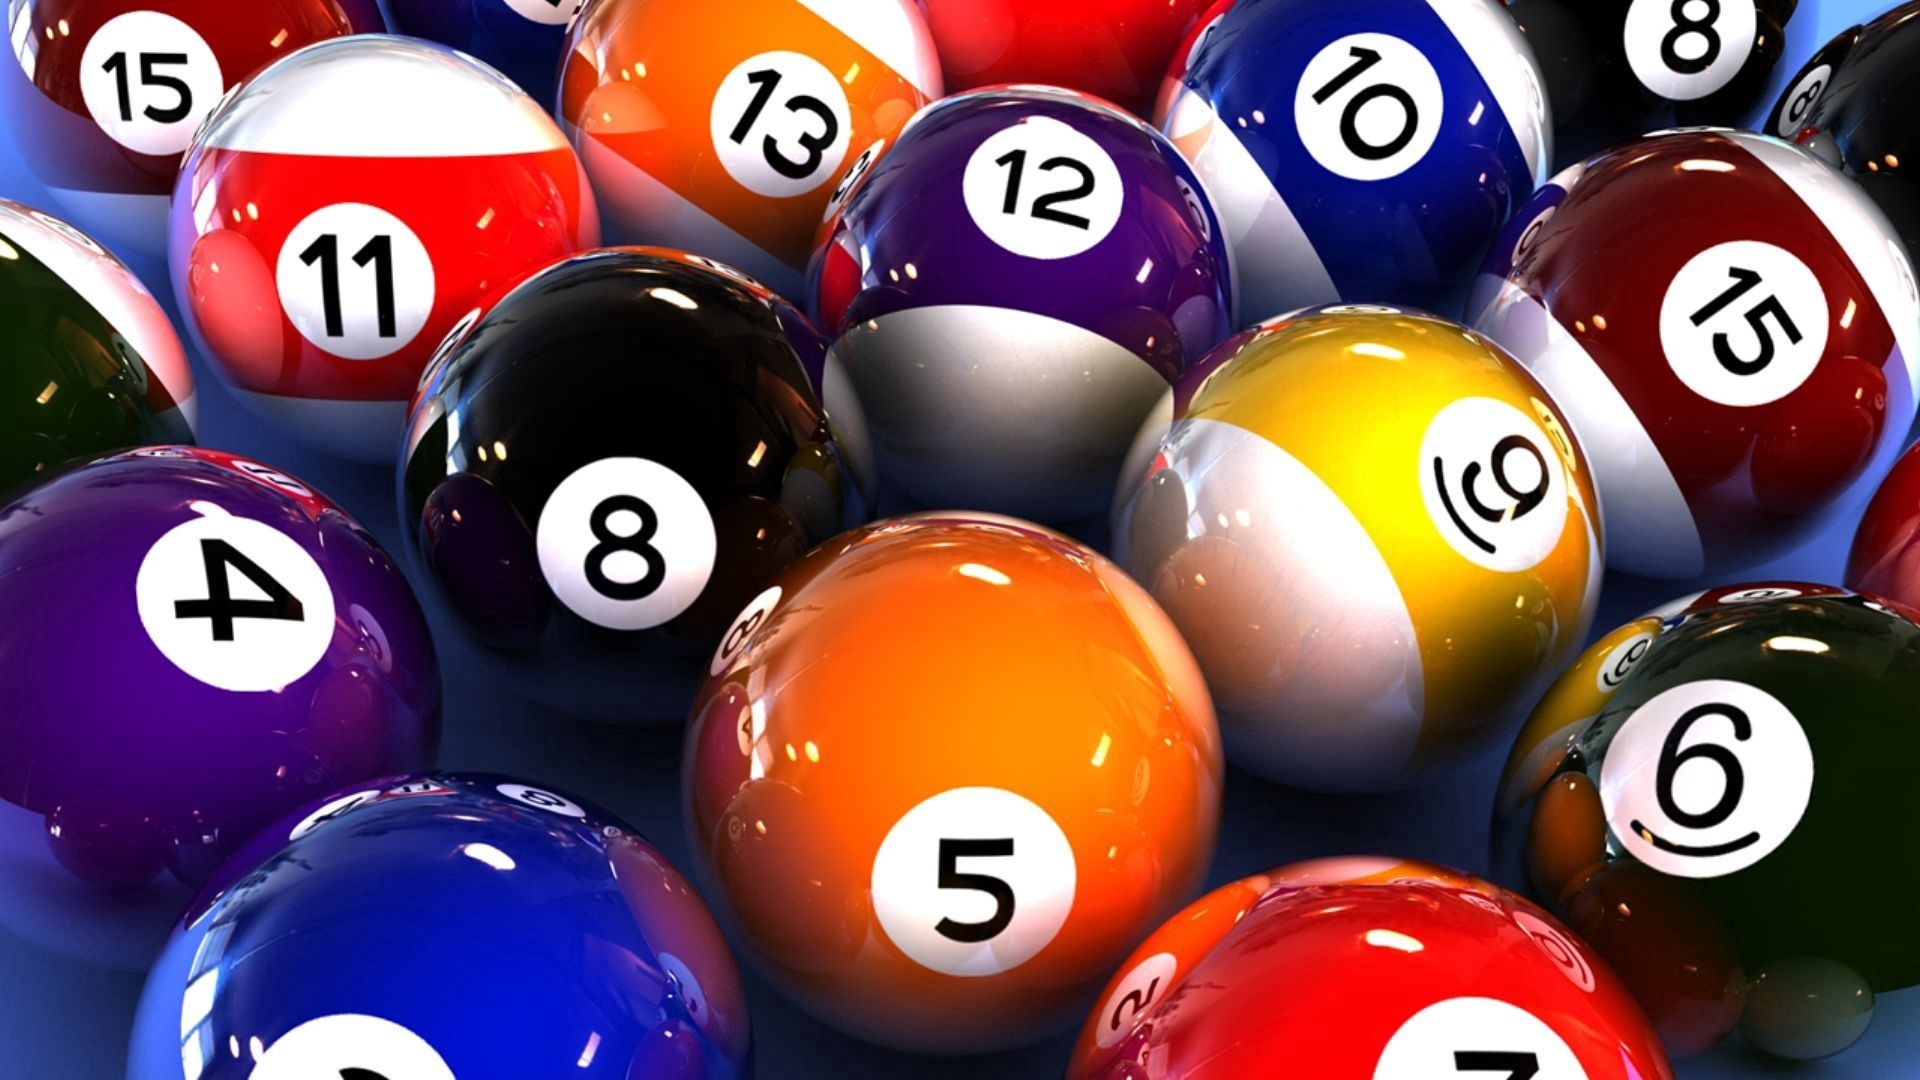 Cue Sports: Billiard balls, Small but hard and numbered balls used in carom billiards, pool, and snooker. 1920x1080 Full HD Wallpaper.